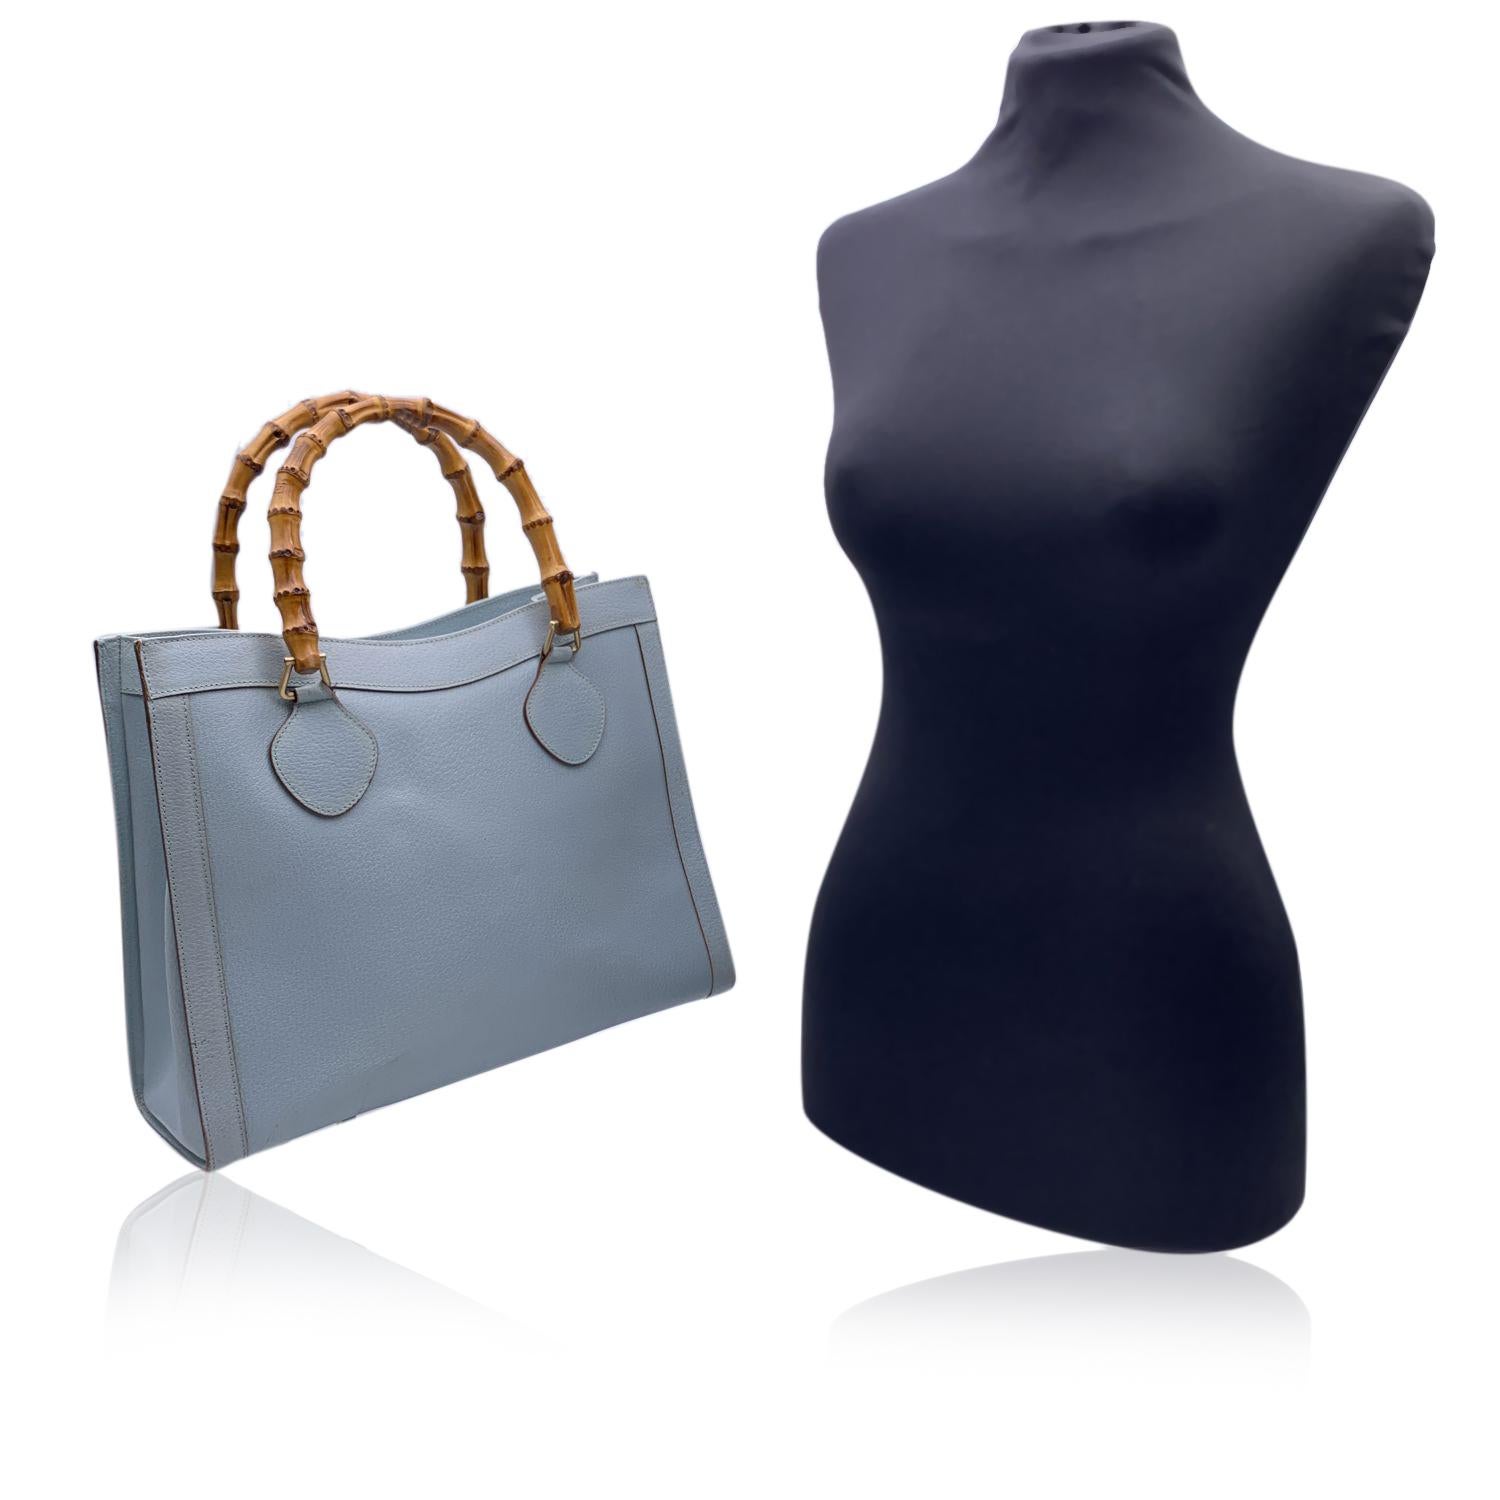 Beautiful Gucci Bamboo tote bag in light blue leather. Double distinctive Bamboo handle. Princess Diana, was snapped carrying a this model on several occasions. Magnetic button closure on top. 5 bottom feet. Gold metal hardware. 1 compartment in the